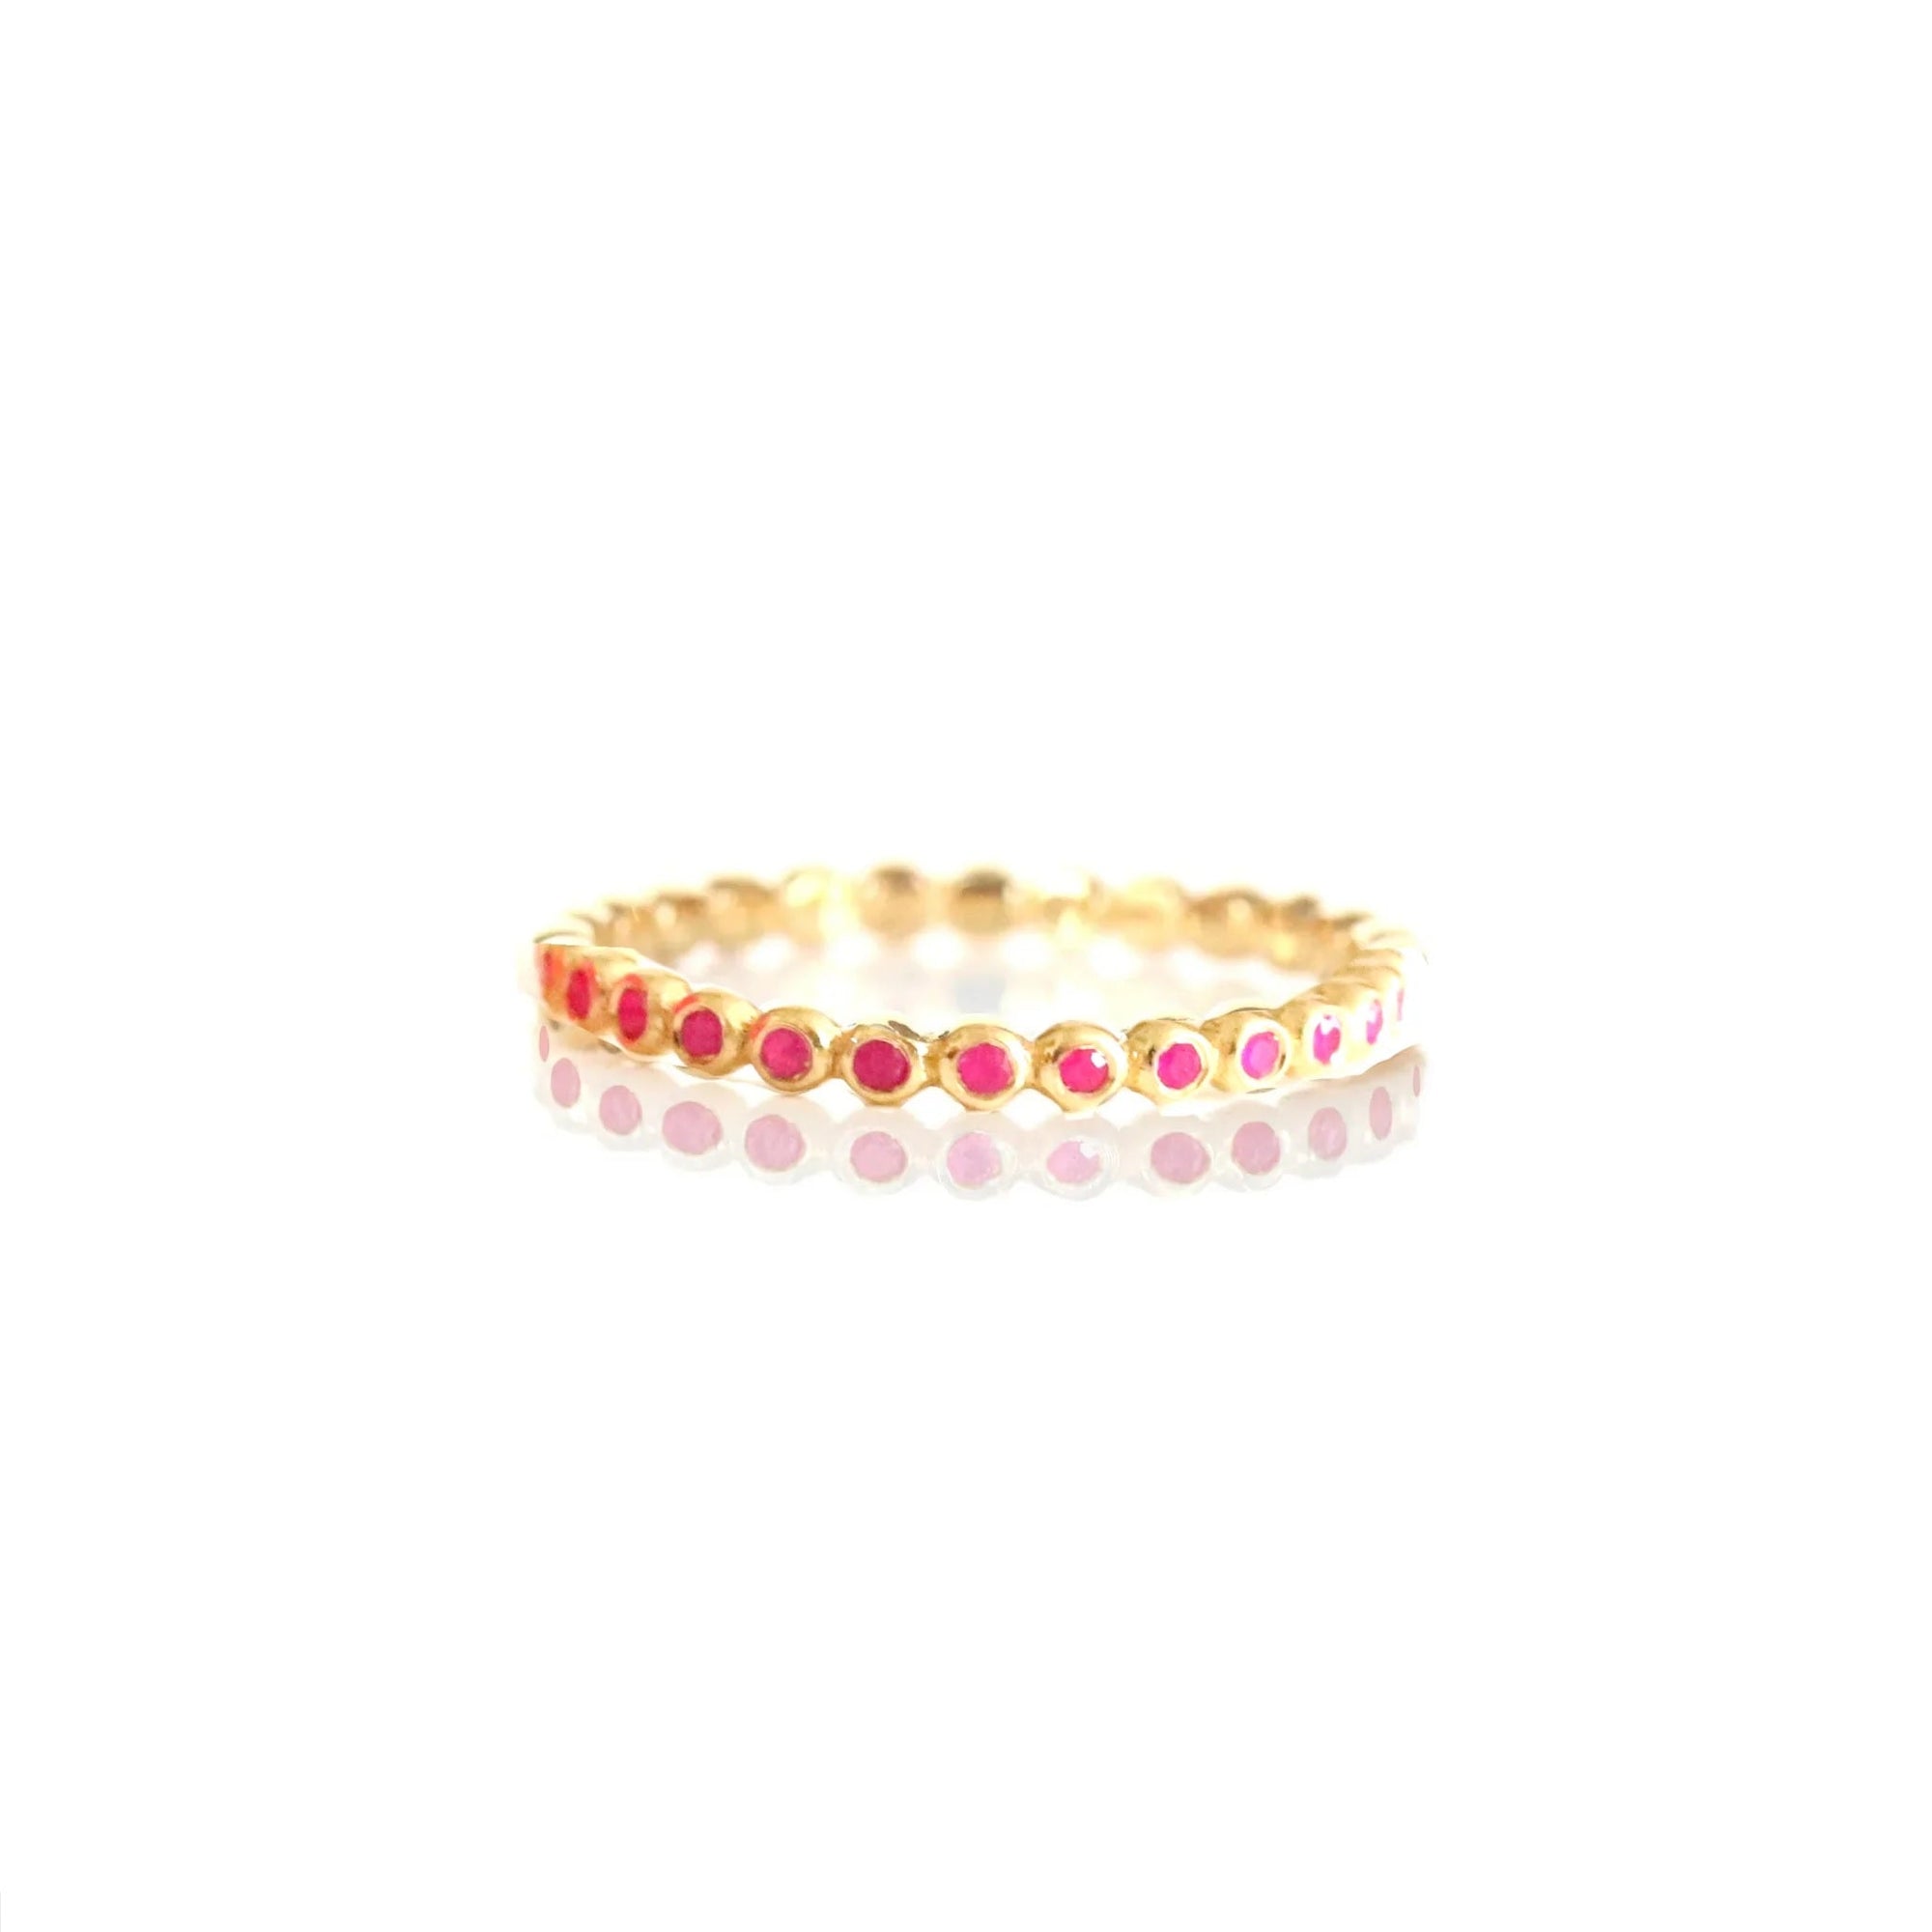 LOVE THIN DISK BAND RING - HOT PINK CHALCEDONY & GOLD - SO PRETTY CARA COTTER